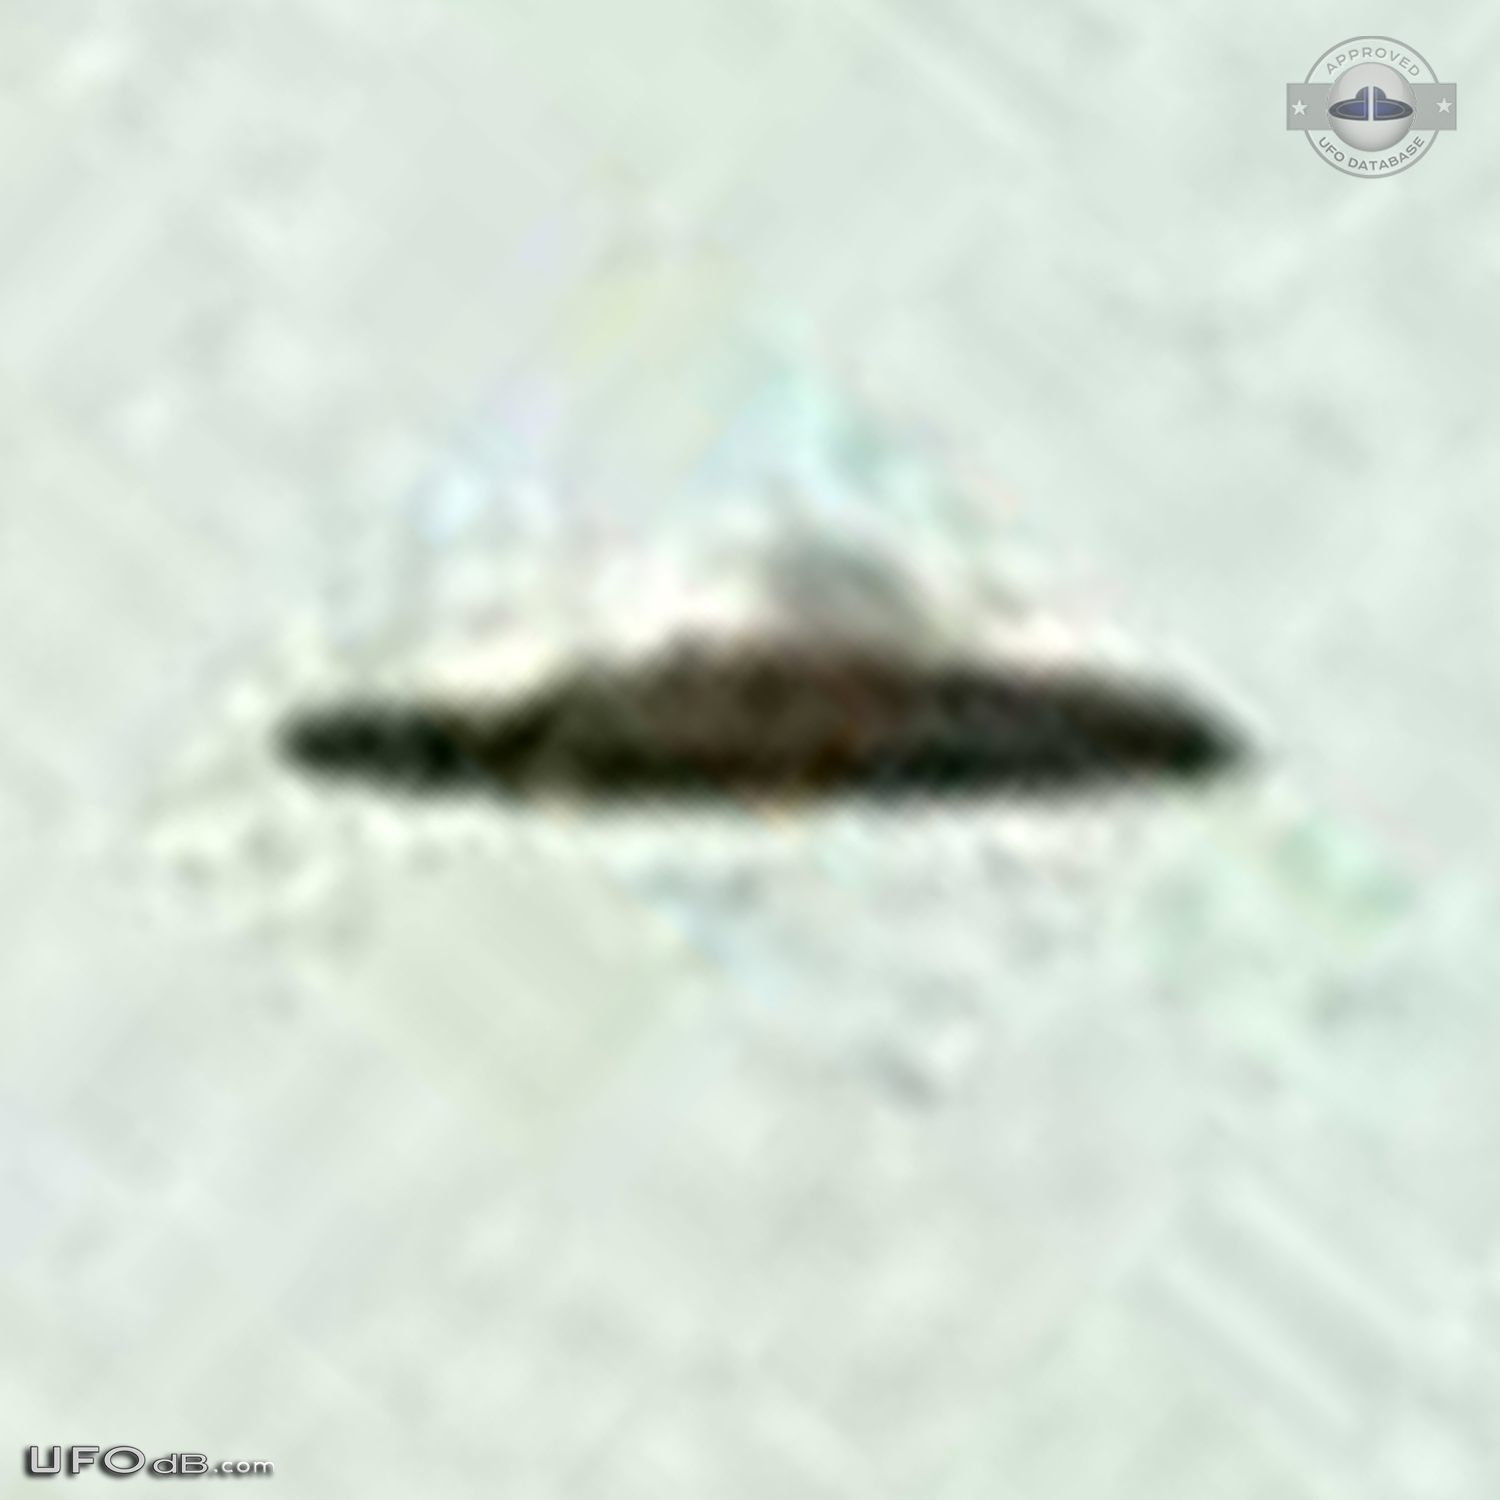 1967 Peru UFO sighting caught on pictures Huaylas Valley Yungay Ancash UFO Picture #440-4